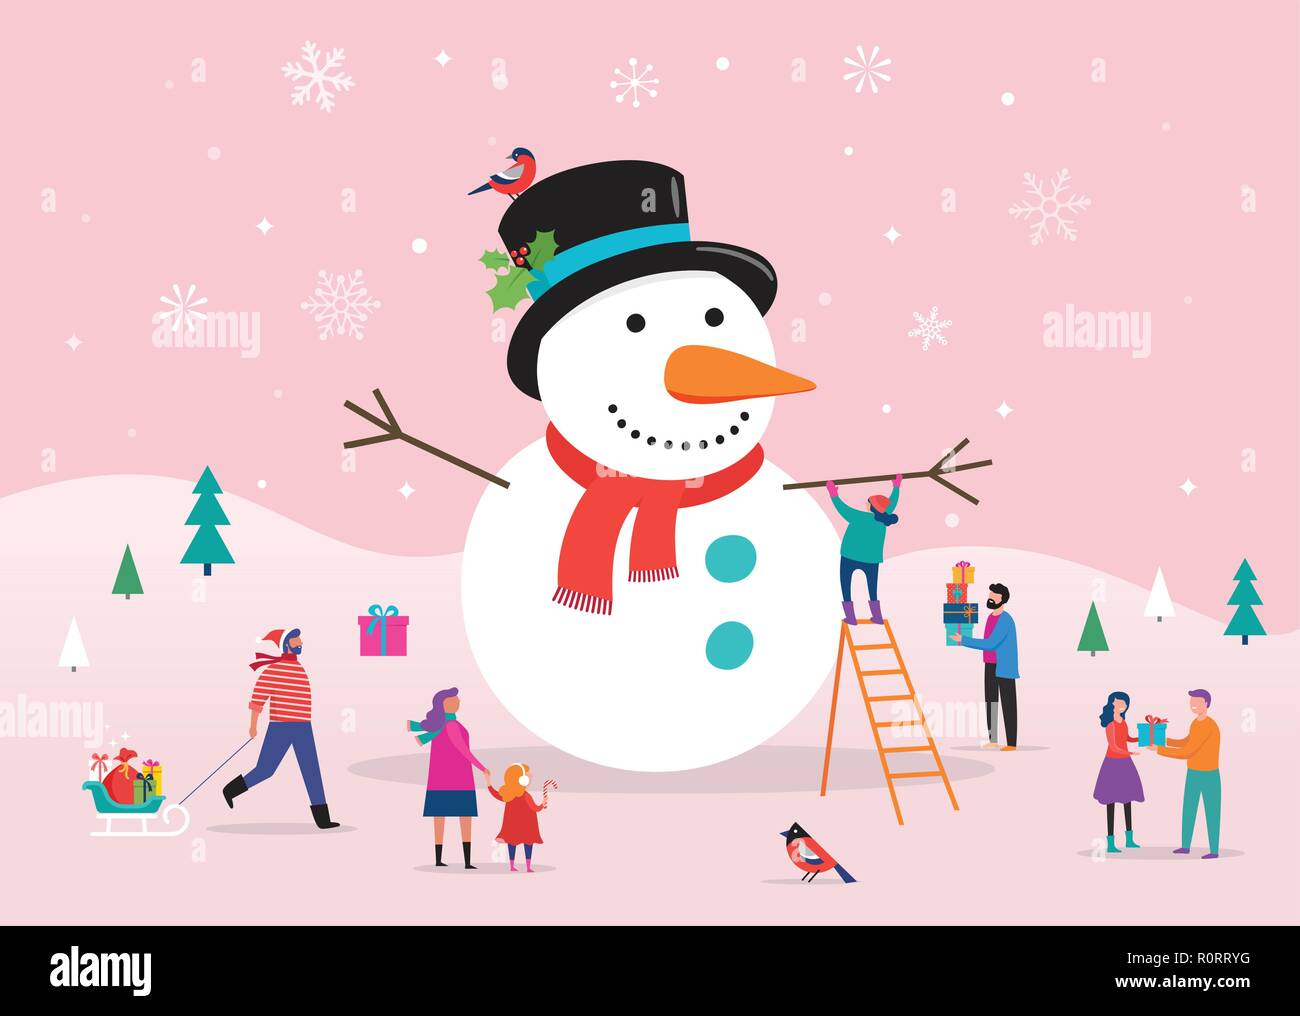 Merry Christmas card, background, bannner with huge snowman and small people, young men and women, families having fun in snow, skiing, snowboarding, sledding, ice skating, concept vector illustration Stock Vector